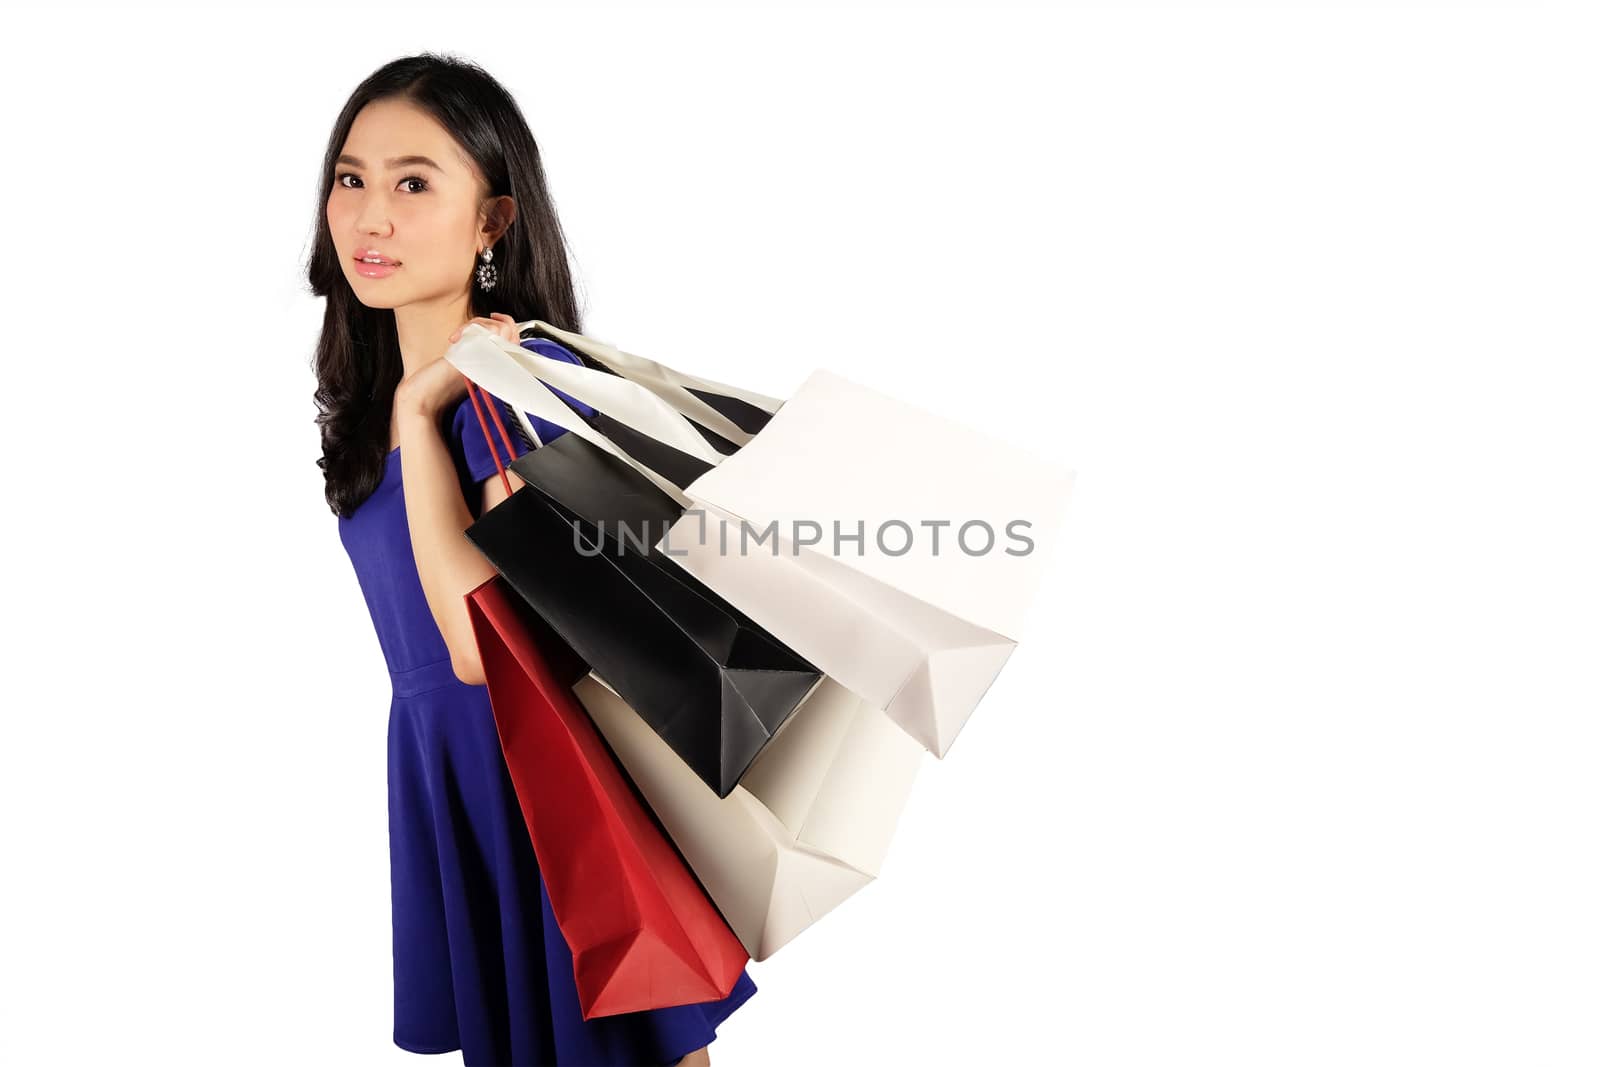 Happy women in blue dress with a shopping bag on white background and clipping path